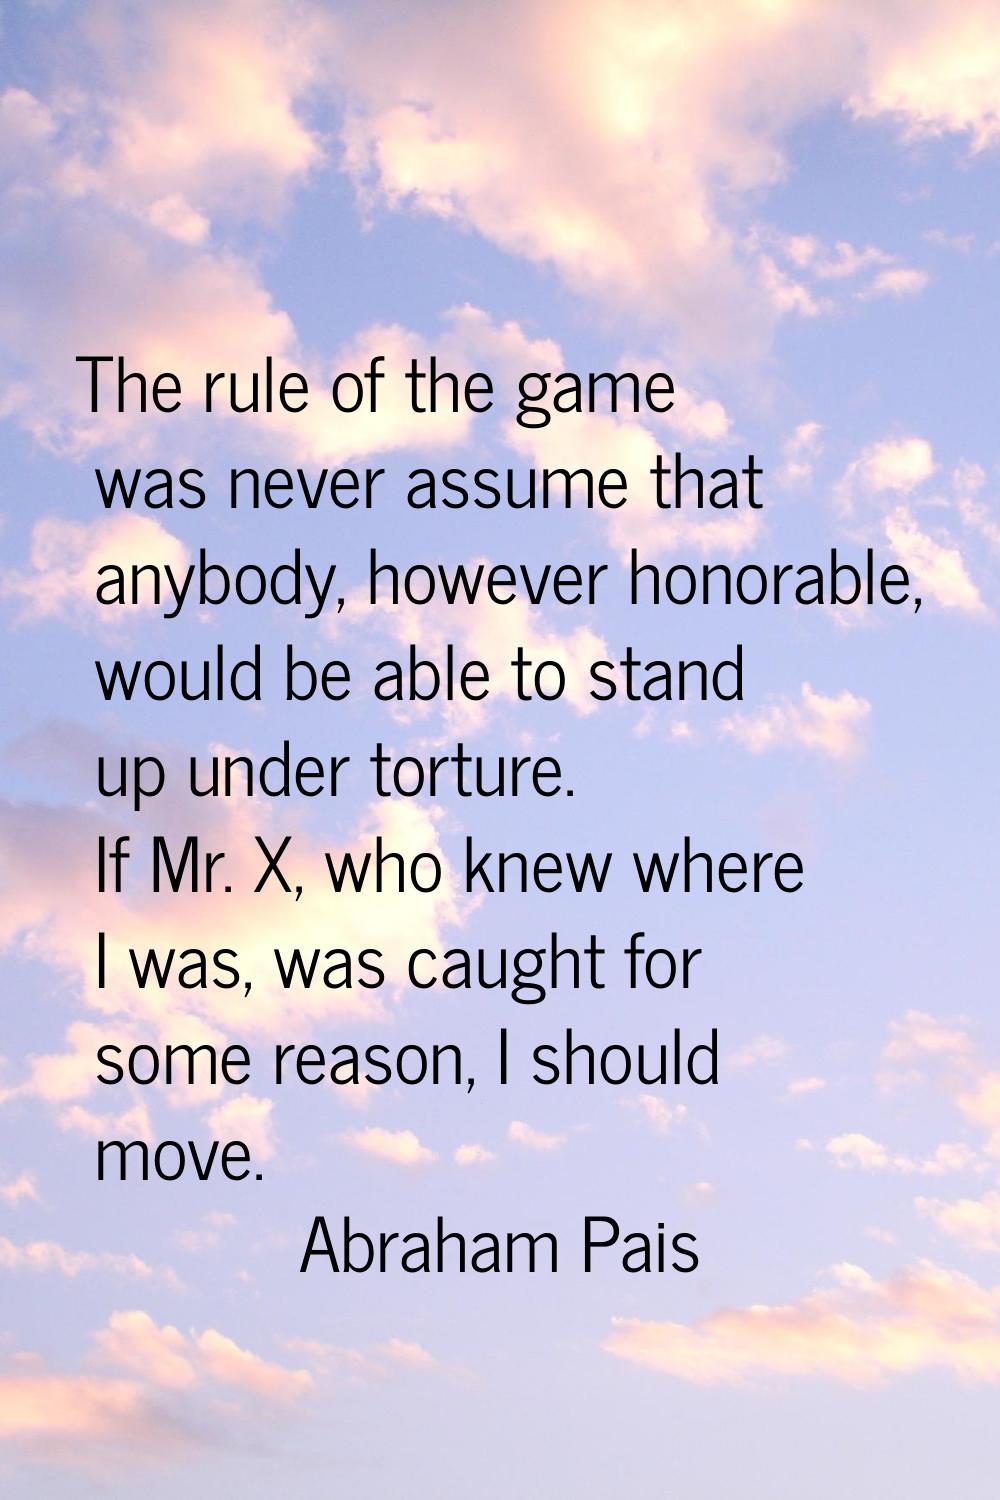 The rule of the game was never assume that anybody, however honorable, would be able to stand up un